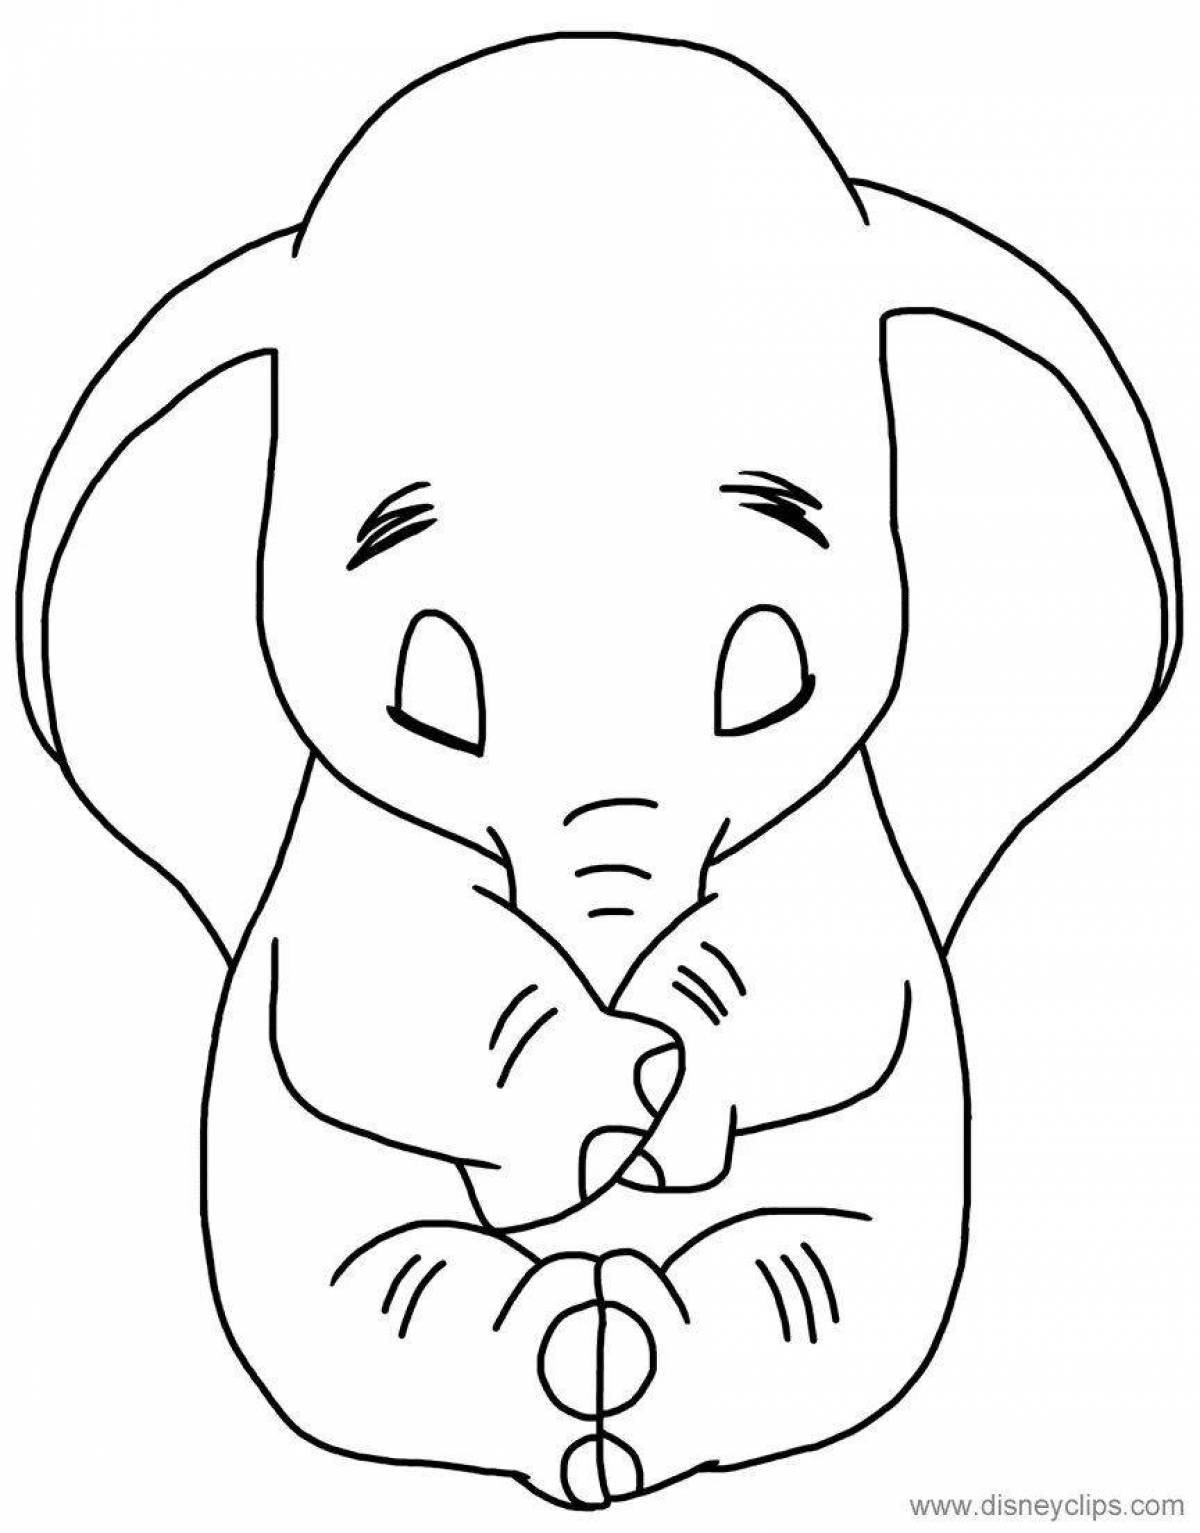 Dumbo baby elephant coloring page